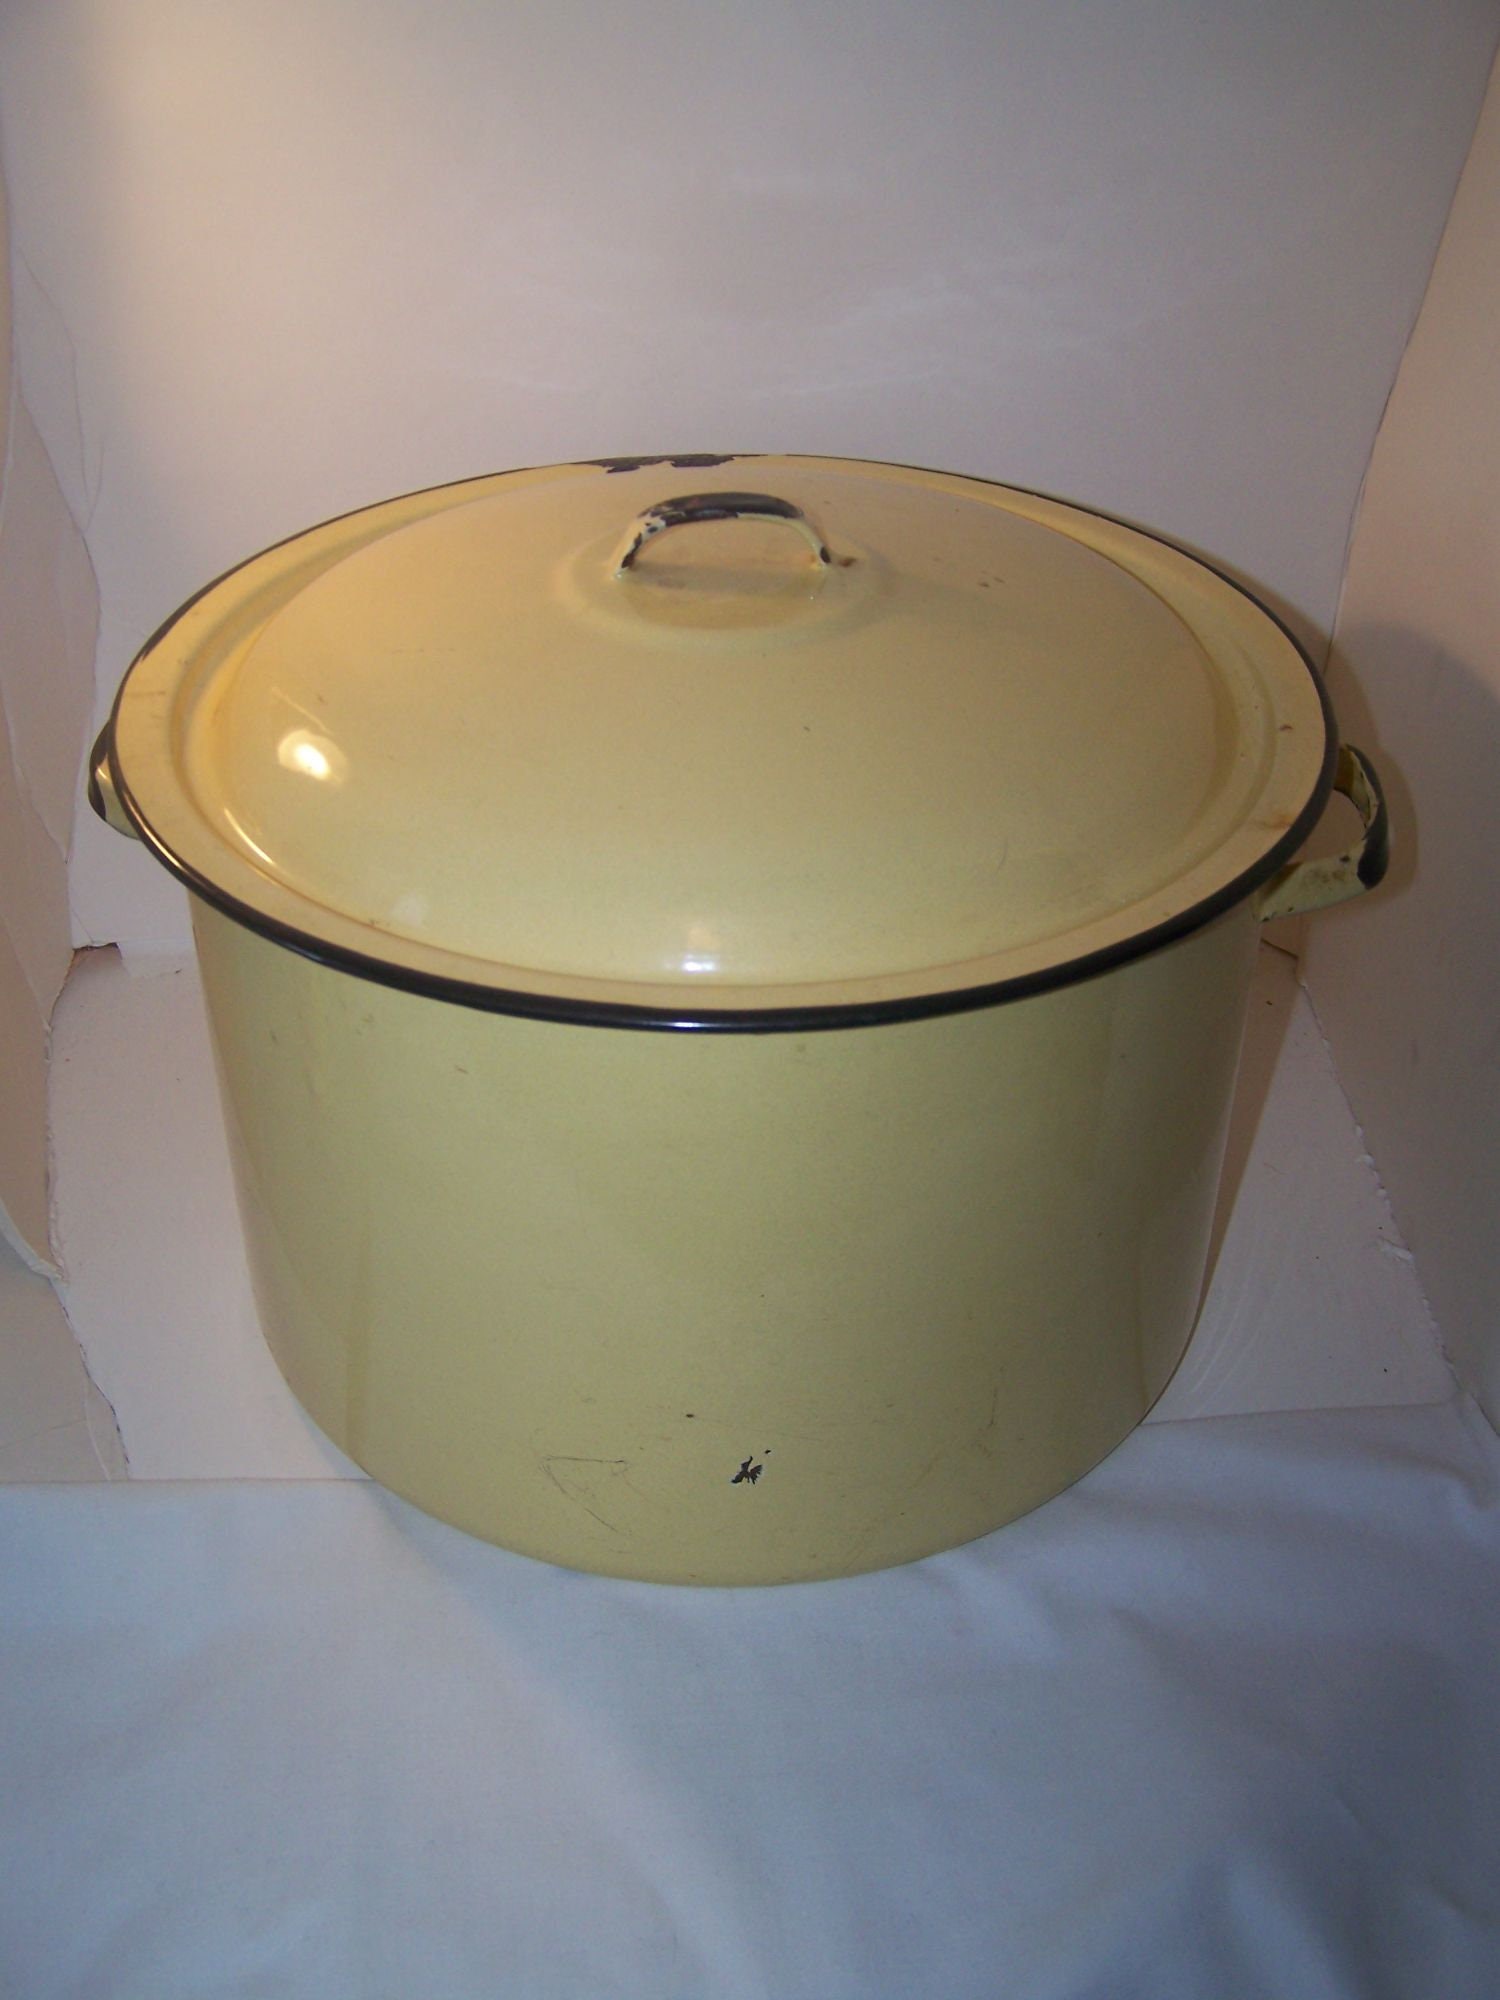 Vintage Leyse Aluminum Co. Stock Pot with top Venting - Original !!